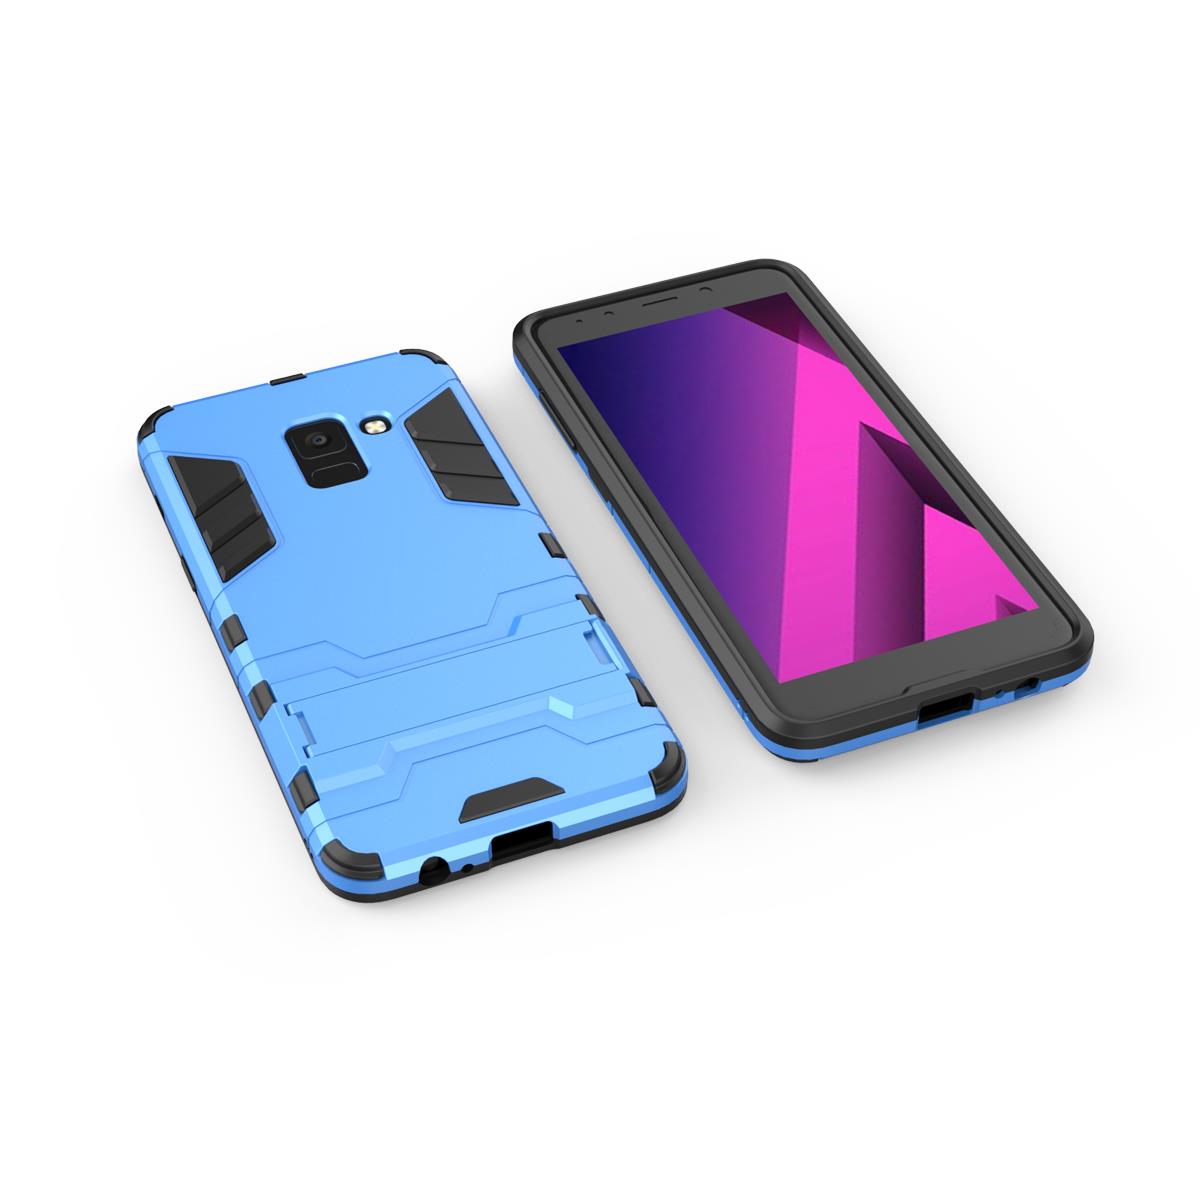 Bakeey-2-in-1-Armor-Kickstand-Hard-PC-Protective-Case-for-Samsung-Galaxy-A8-Plus-2018-1297009-6